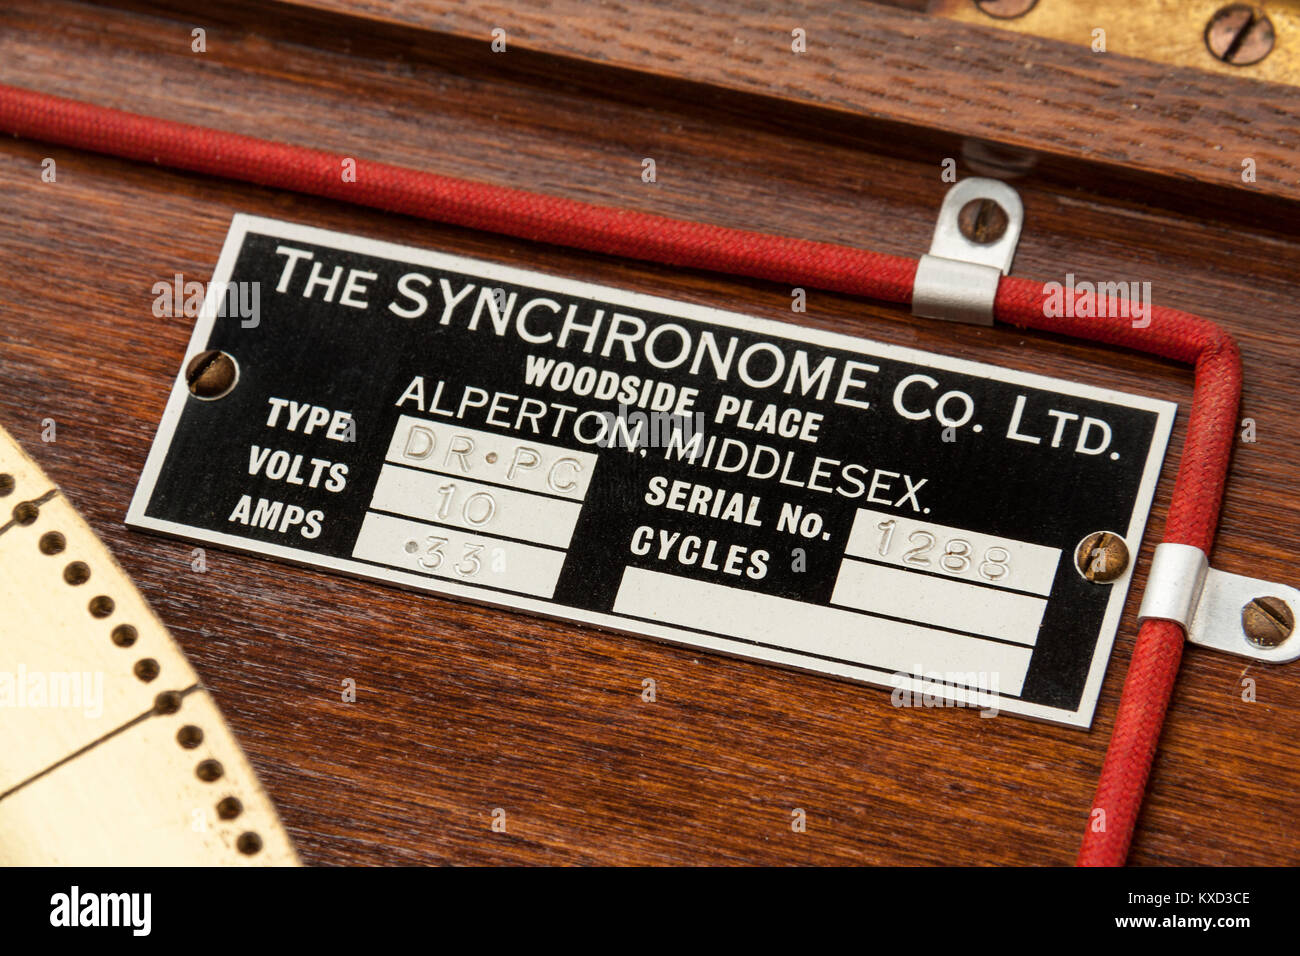 Vintage 1950's electric 10V Synchronome clock DR-PC Bell Programmer (No 1288), made by the Synchronome Co. Ltd, Woodside Place, Alperton, Middlesex. Stock Photo